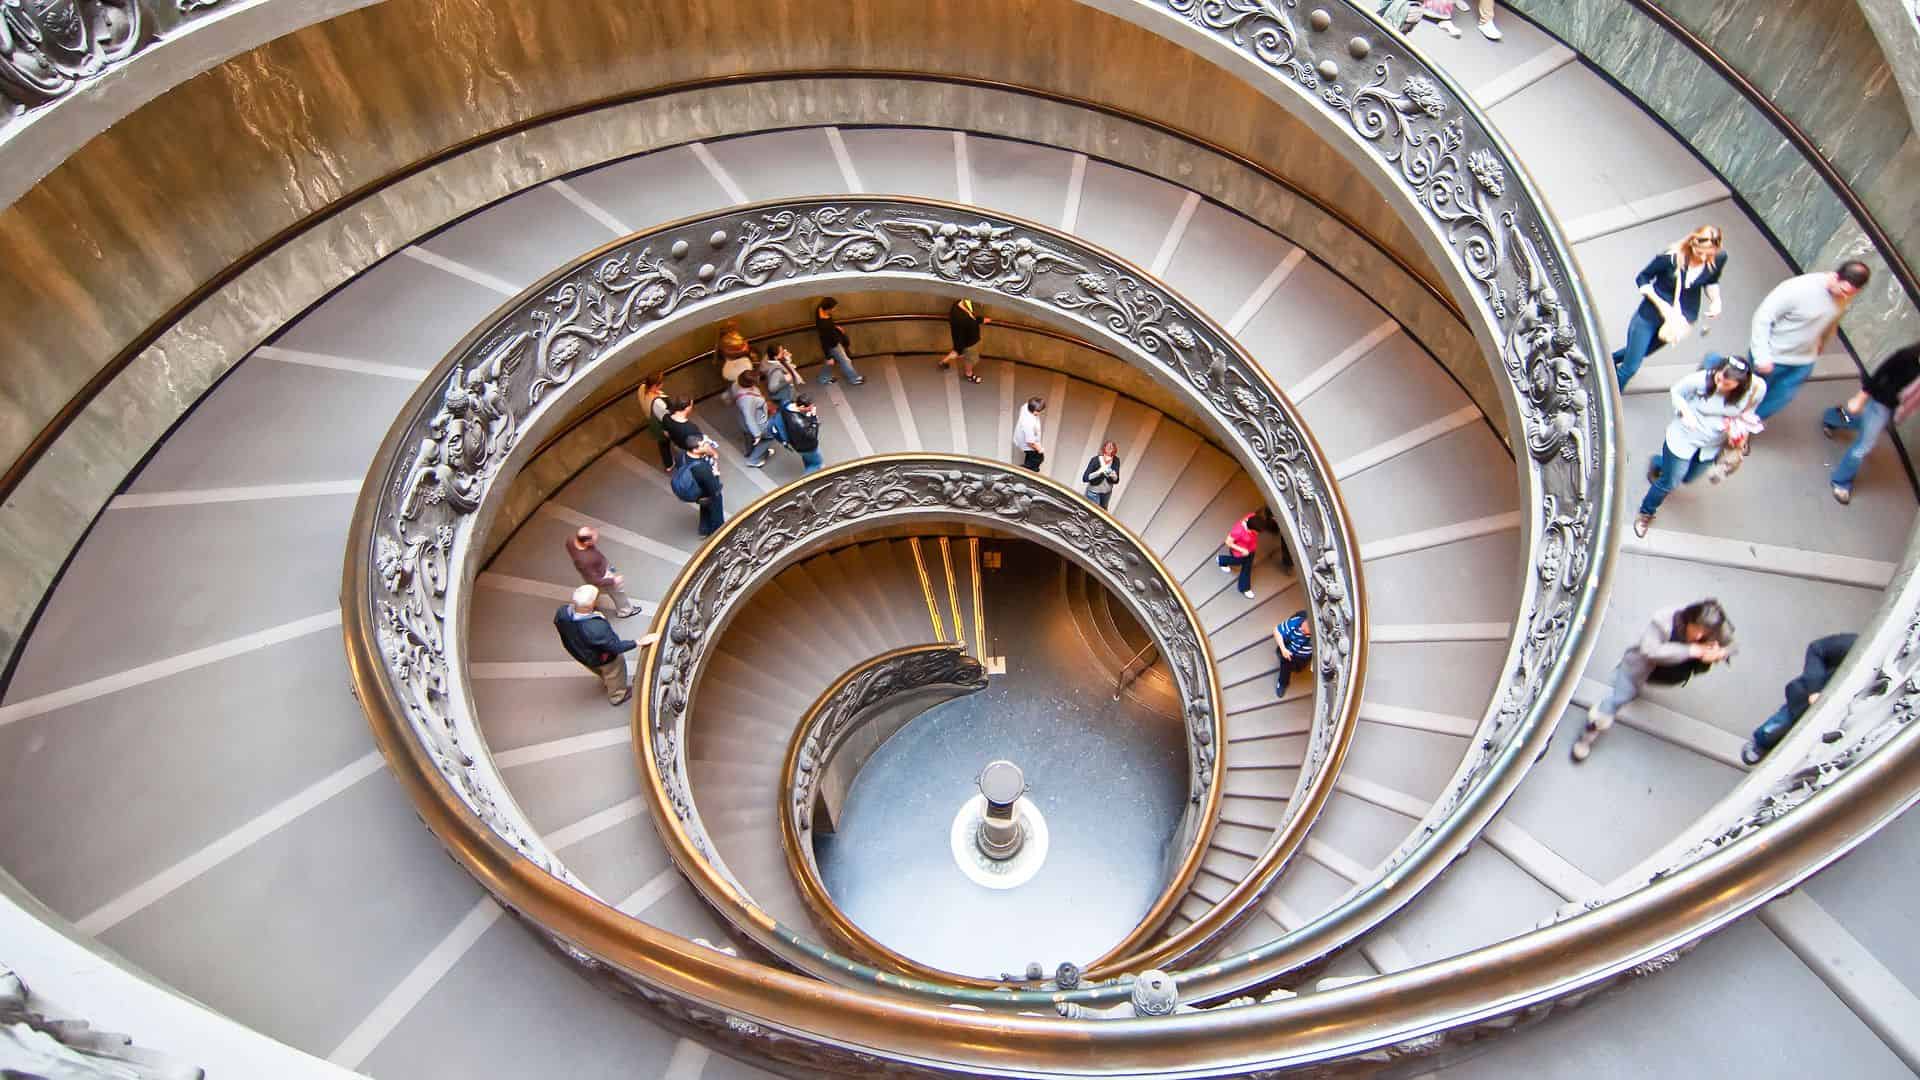 The Bramante Staircase in the Vatican Museums.